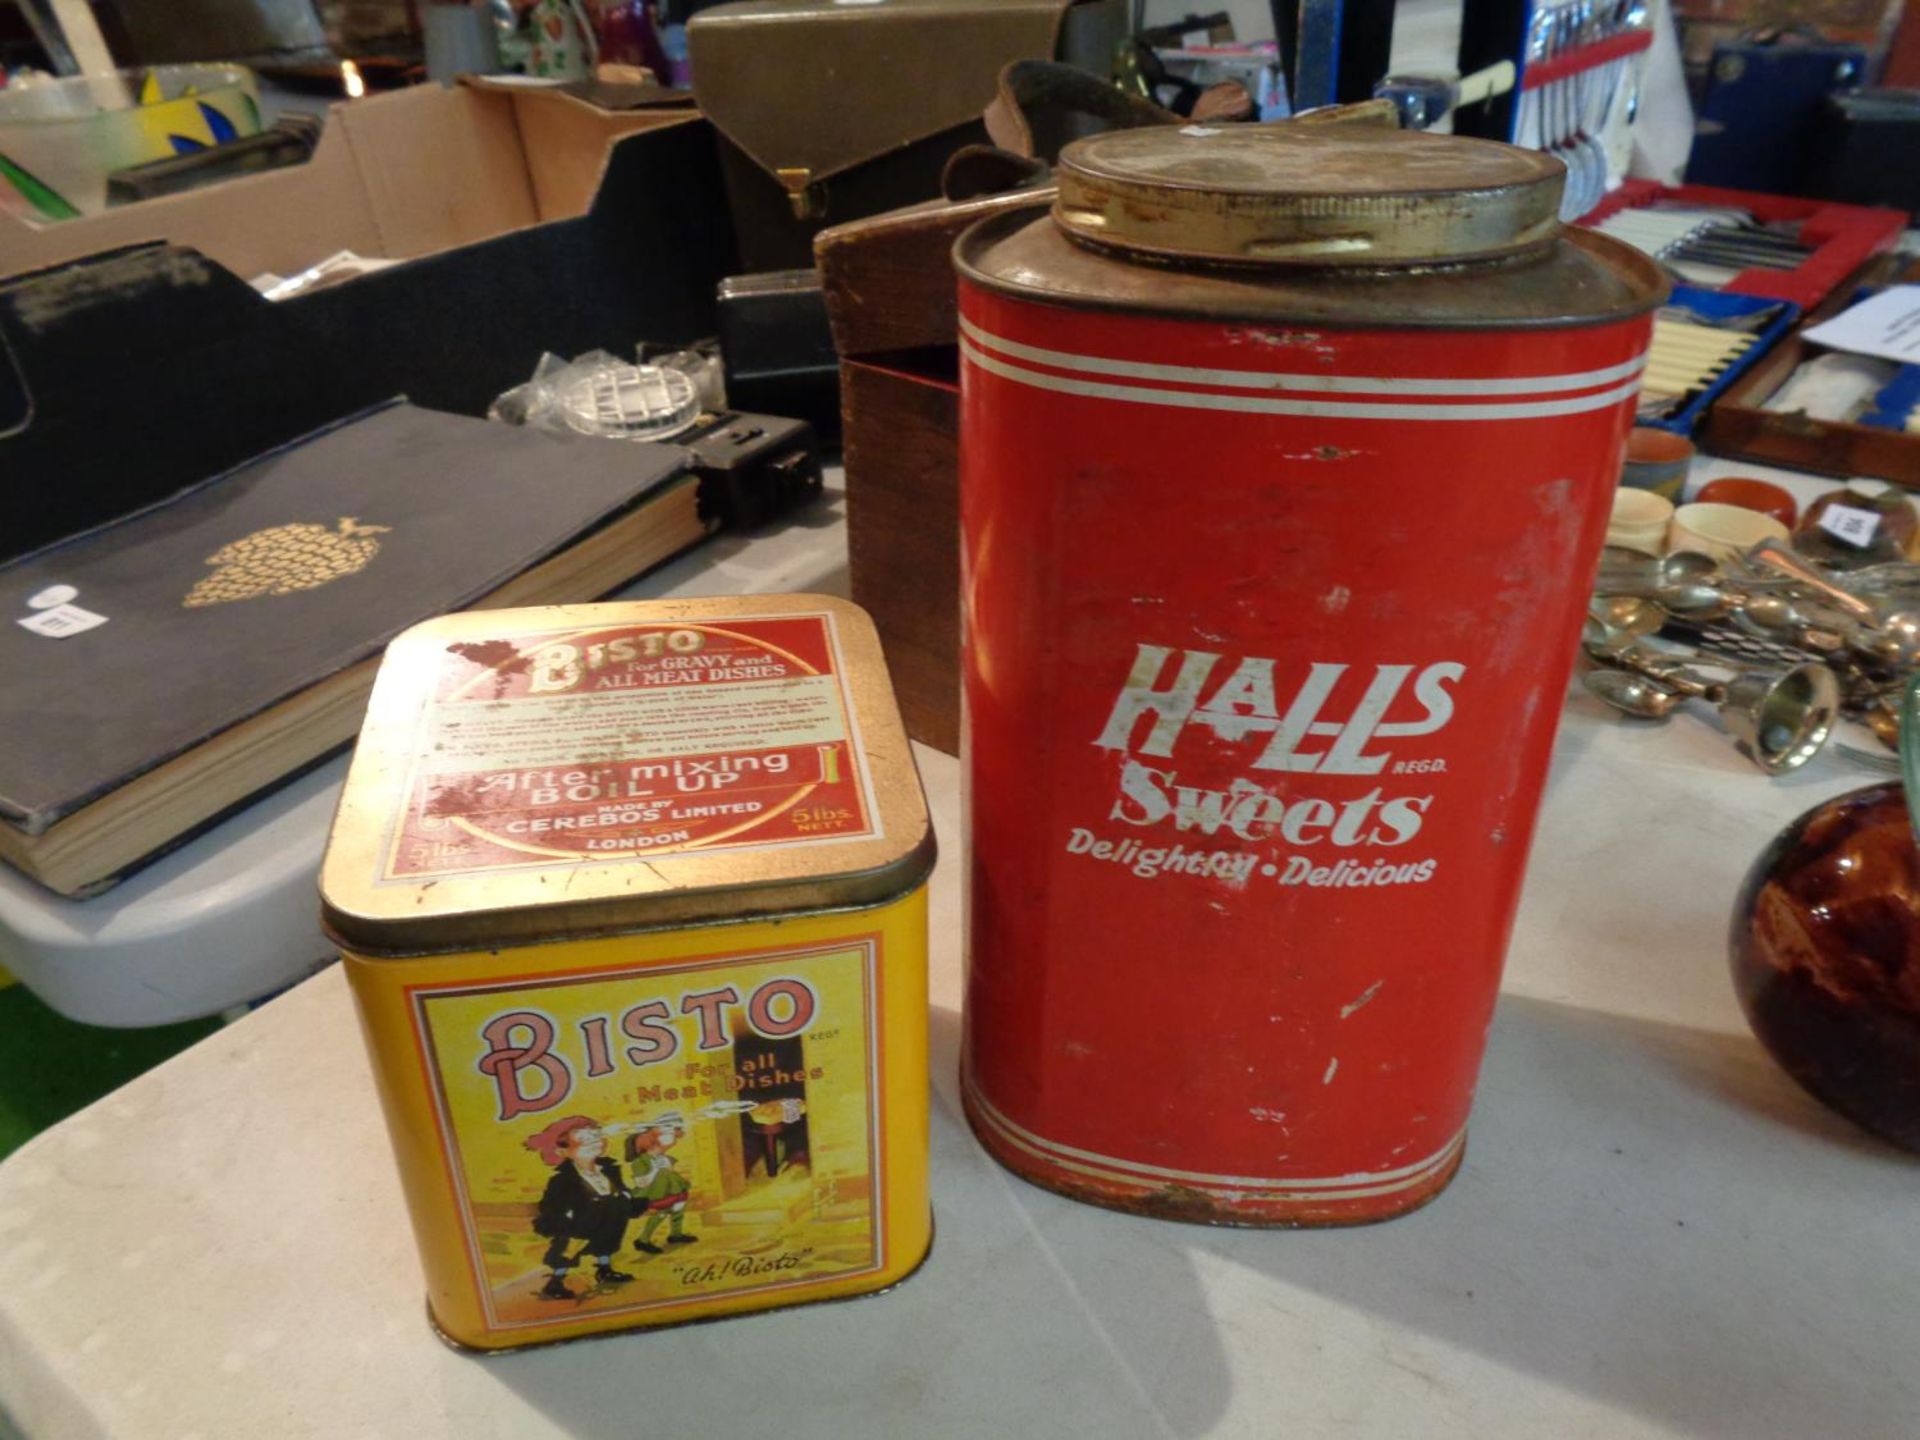 TWO VINTAGE TINS 'HALLS SWEETS' AND 'BISTO' AND TWO DISNEY PLATES